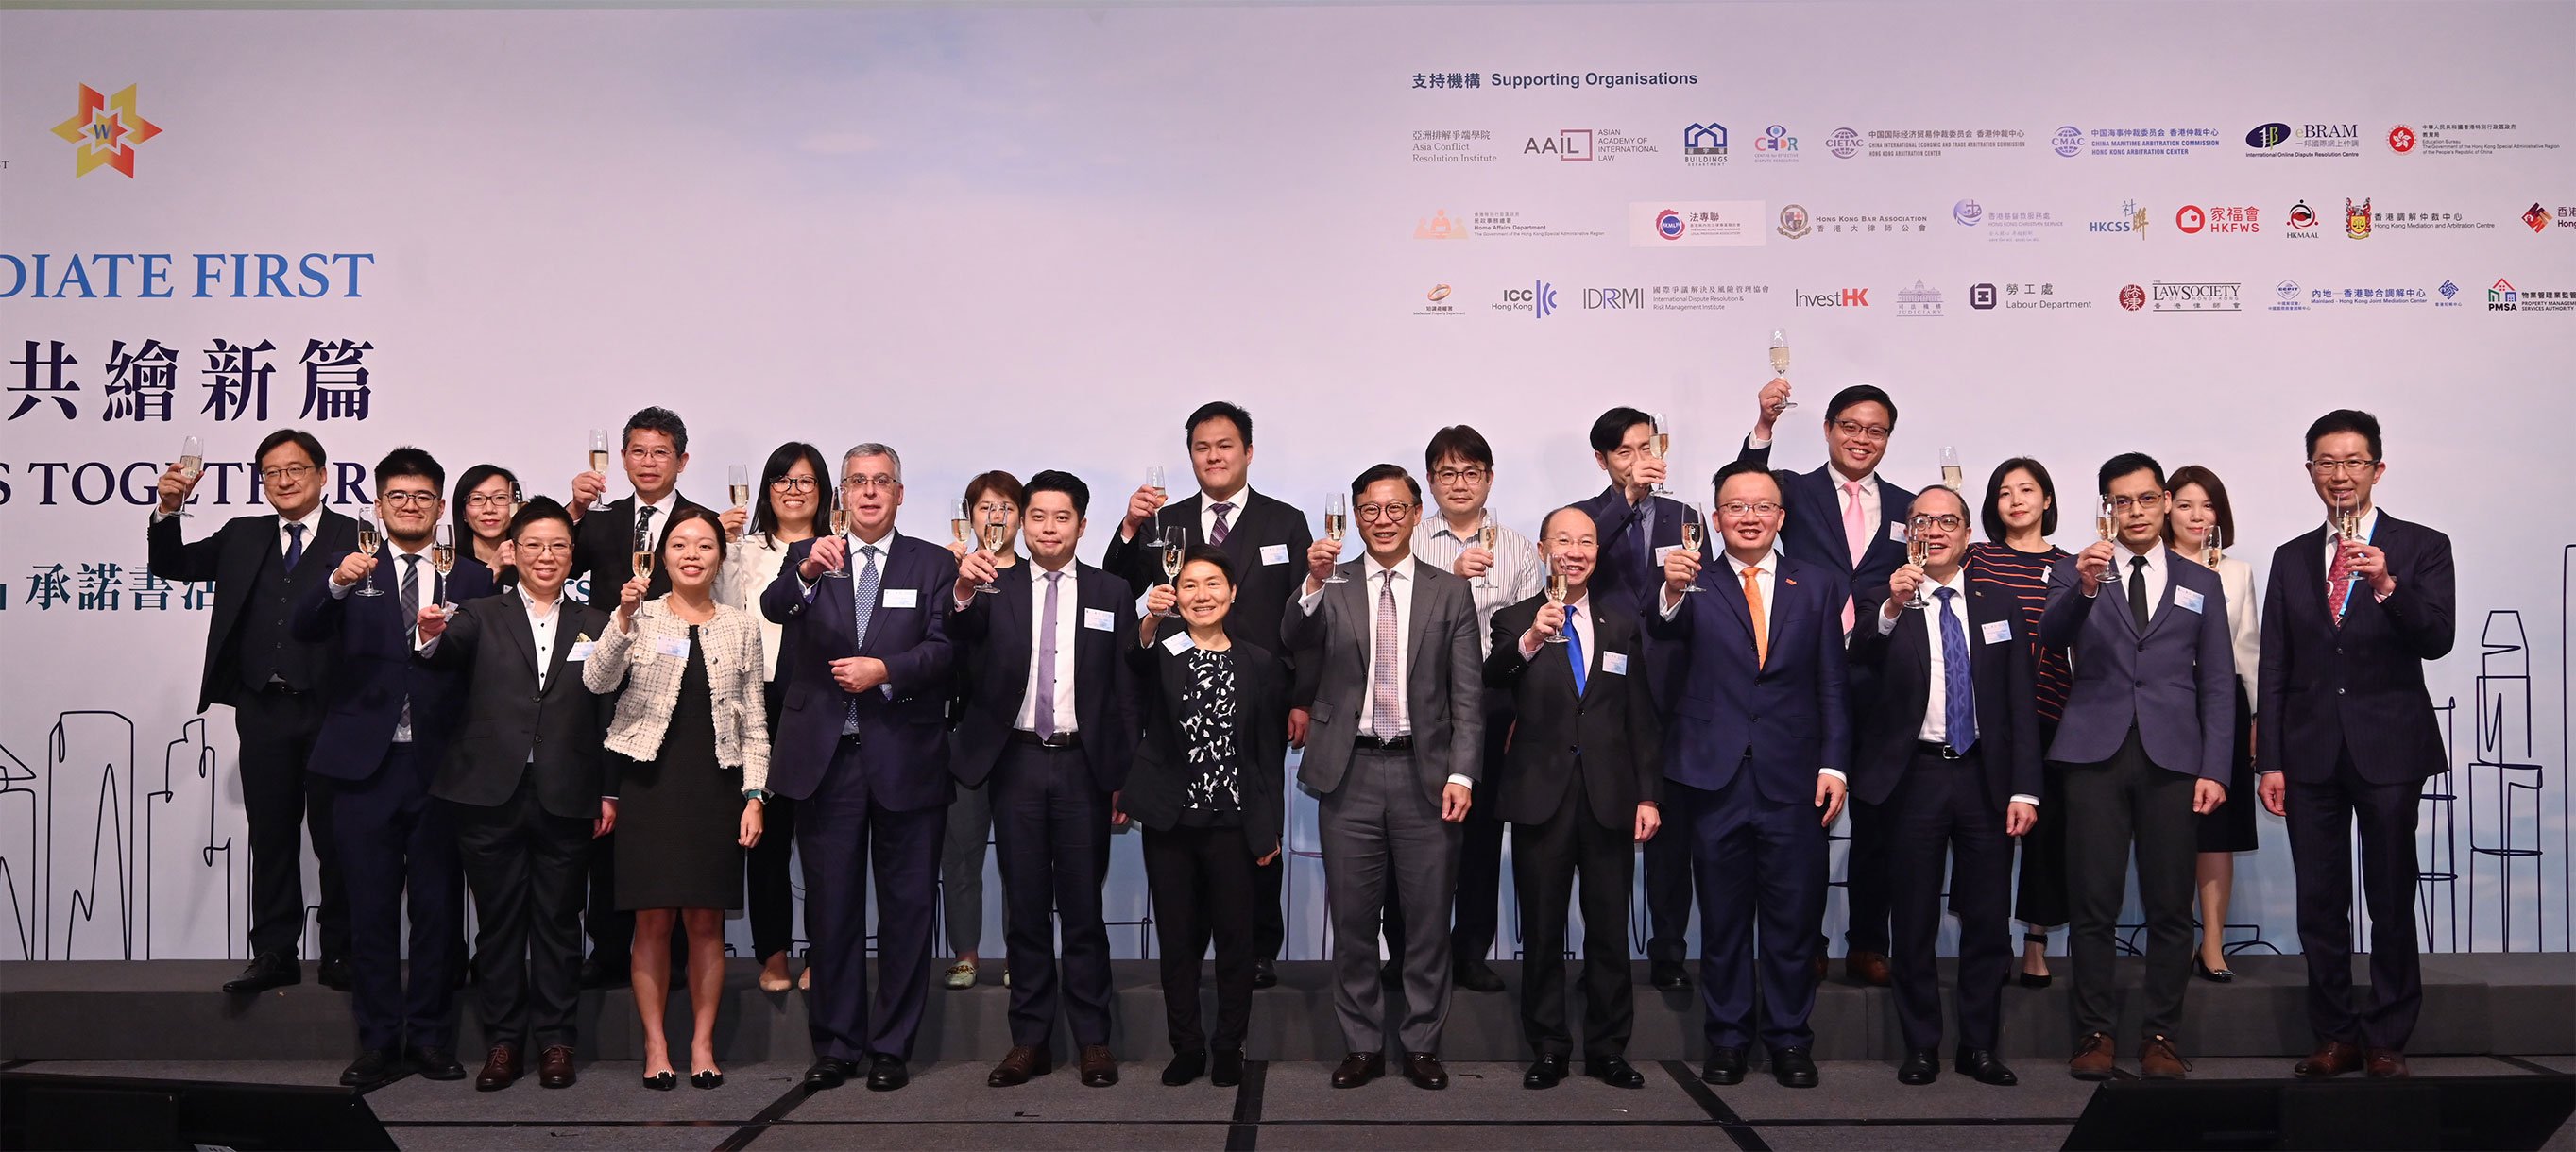 The biennial ”Mediate First” Pledge Event organised by the Department of Justice (DoJ) was held today (May 5). Photo shows the Deputy Secretary for Justice, Mr Cheung Kwok-kwan (front row, sixth right), the Law Officer (Civil Law) of the DoJ, Ms Christina Cheung (front row, sixth left), and representatives of supporting organisations proposing a toast.